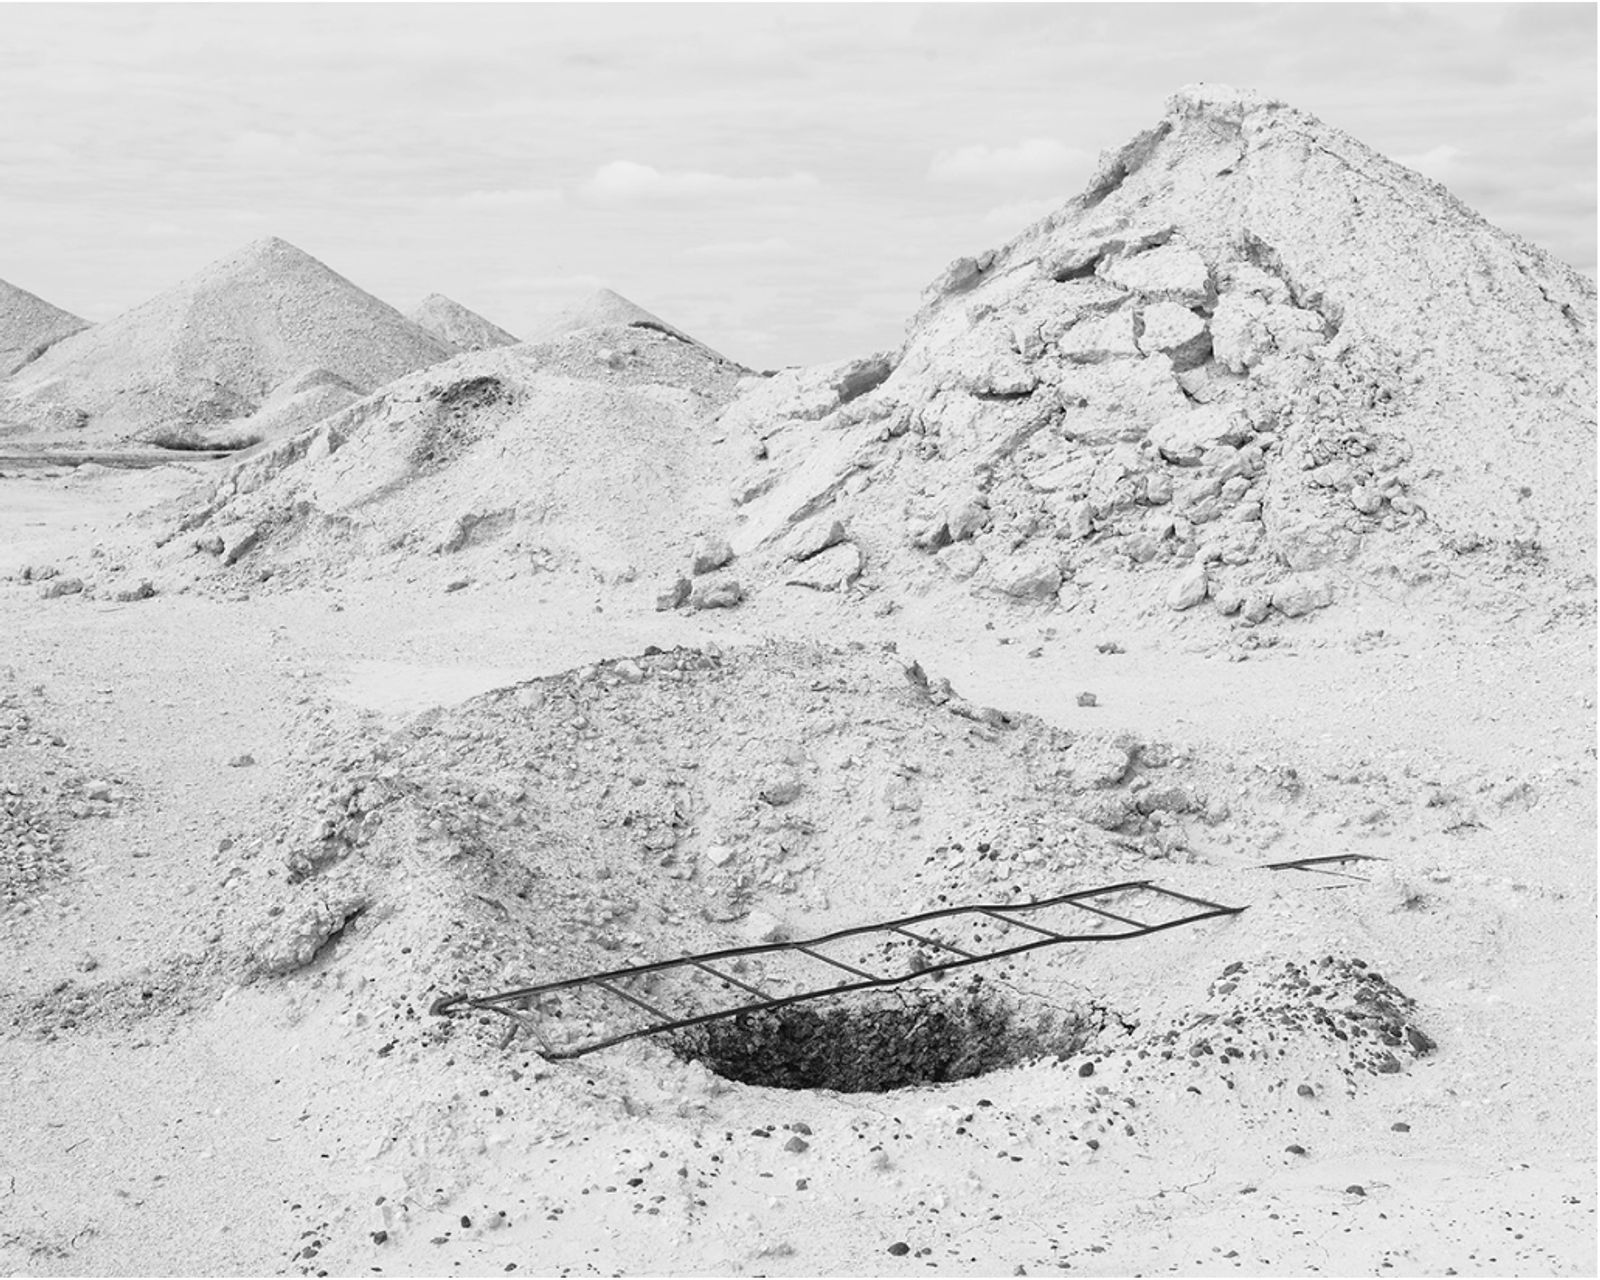 © Antoine Bruy, from the series Outback Mythologies - The White Man's Hole